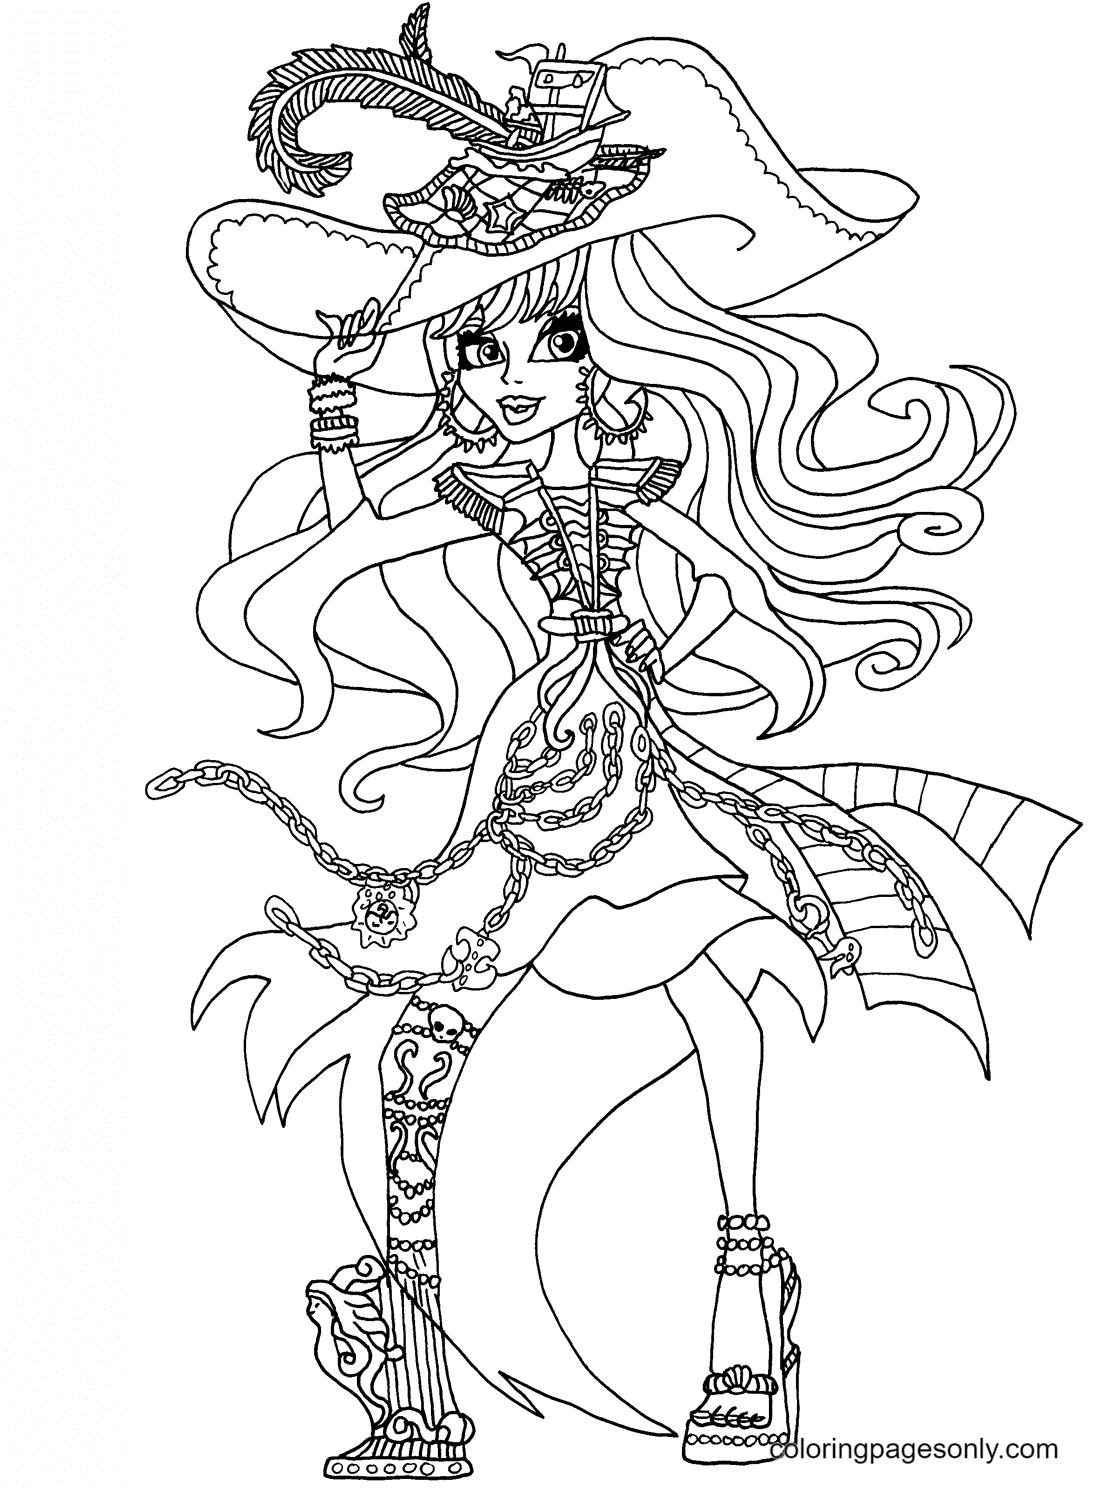 Haunted Vandala Doubloons Coloring Pages